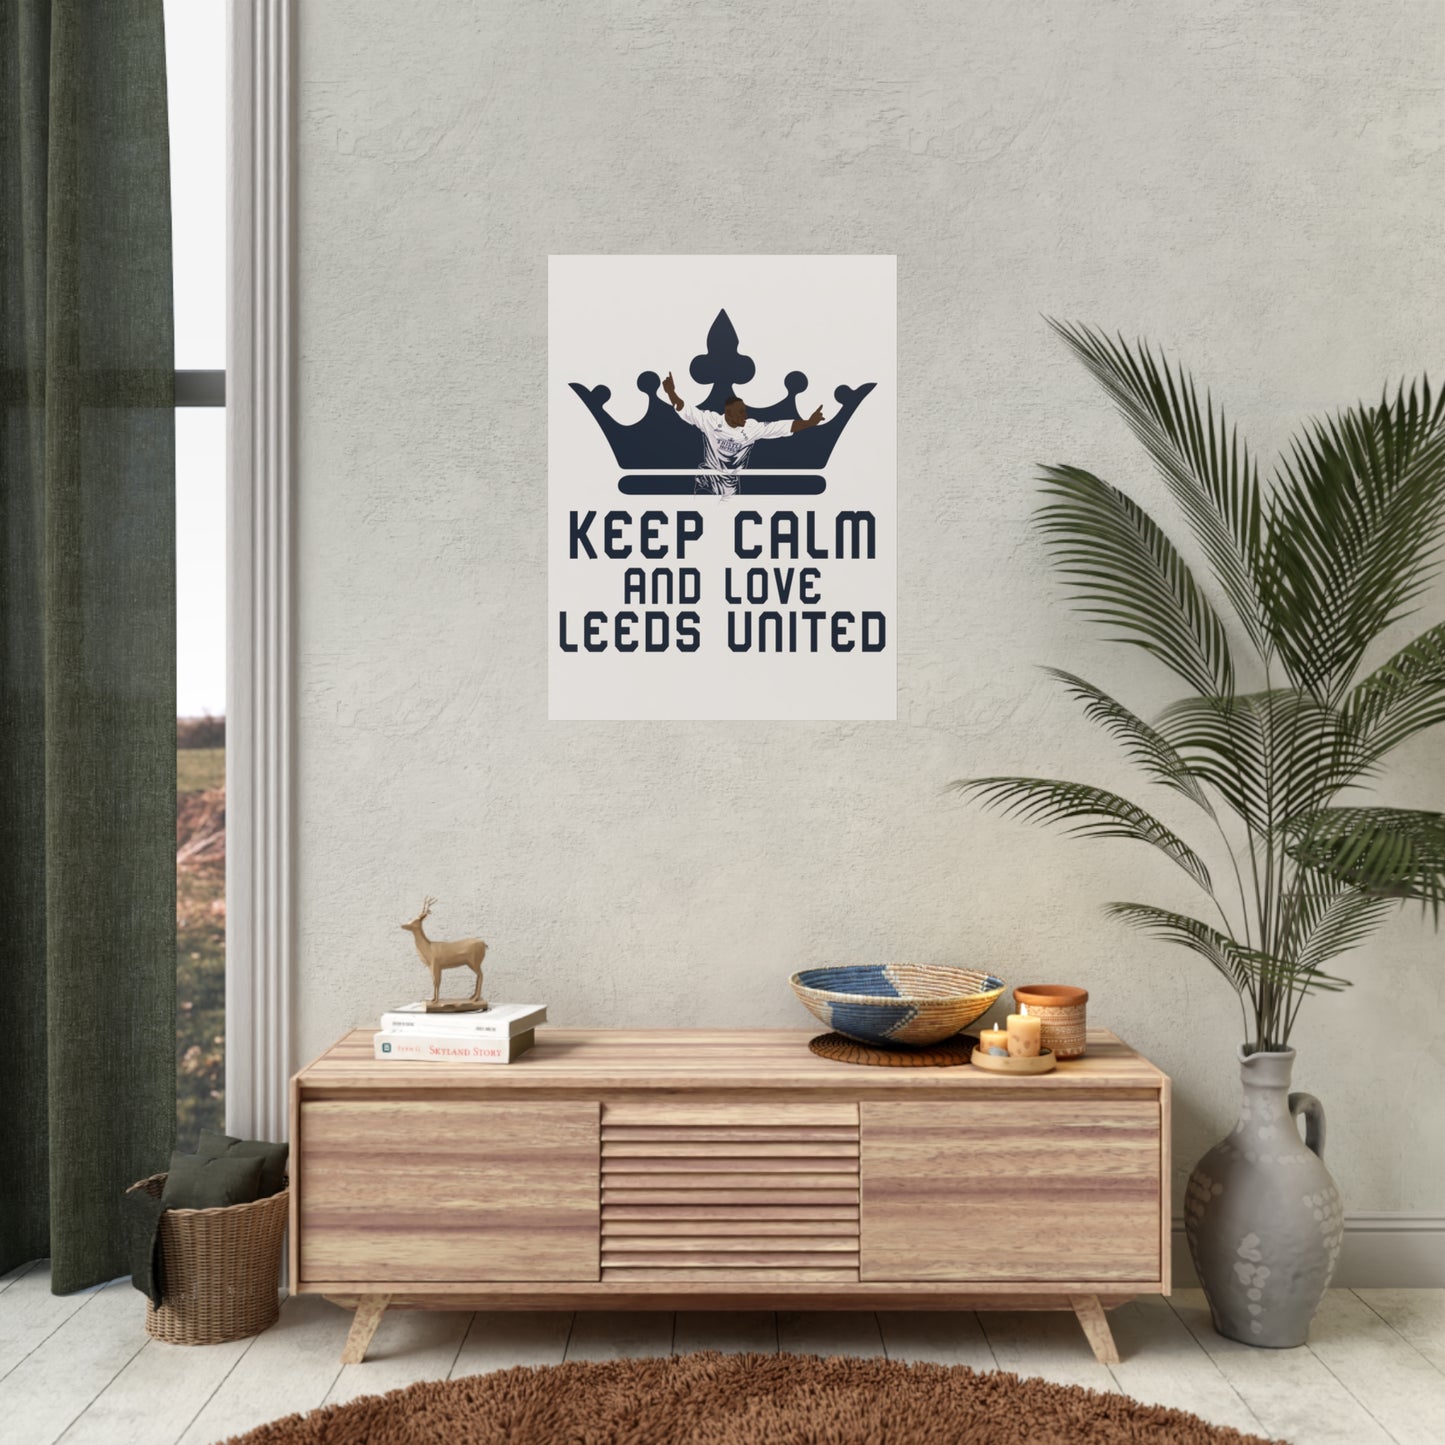 "Keep Calm And Love Leeds United" Poster